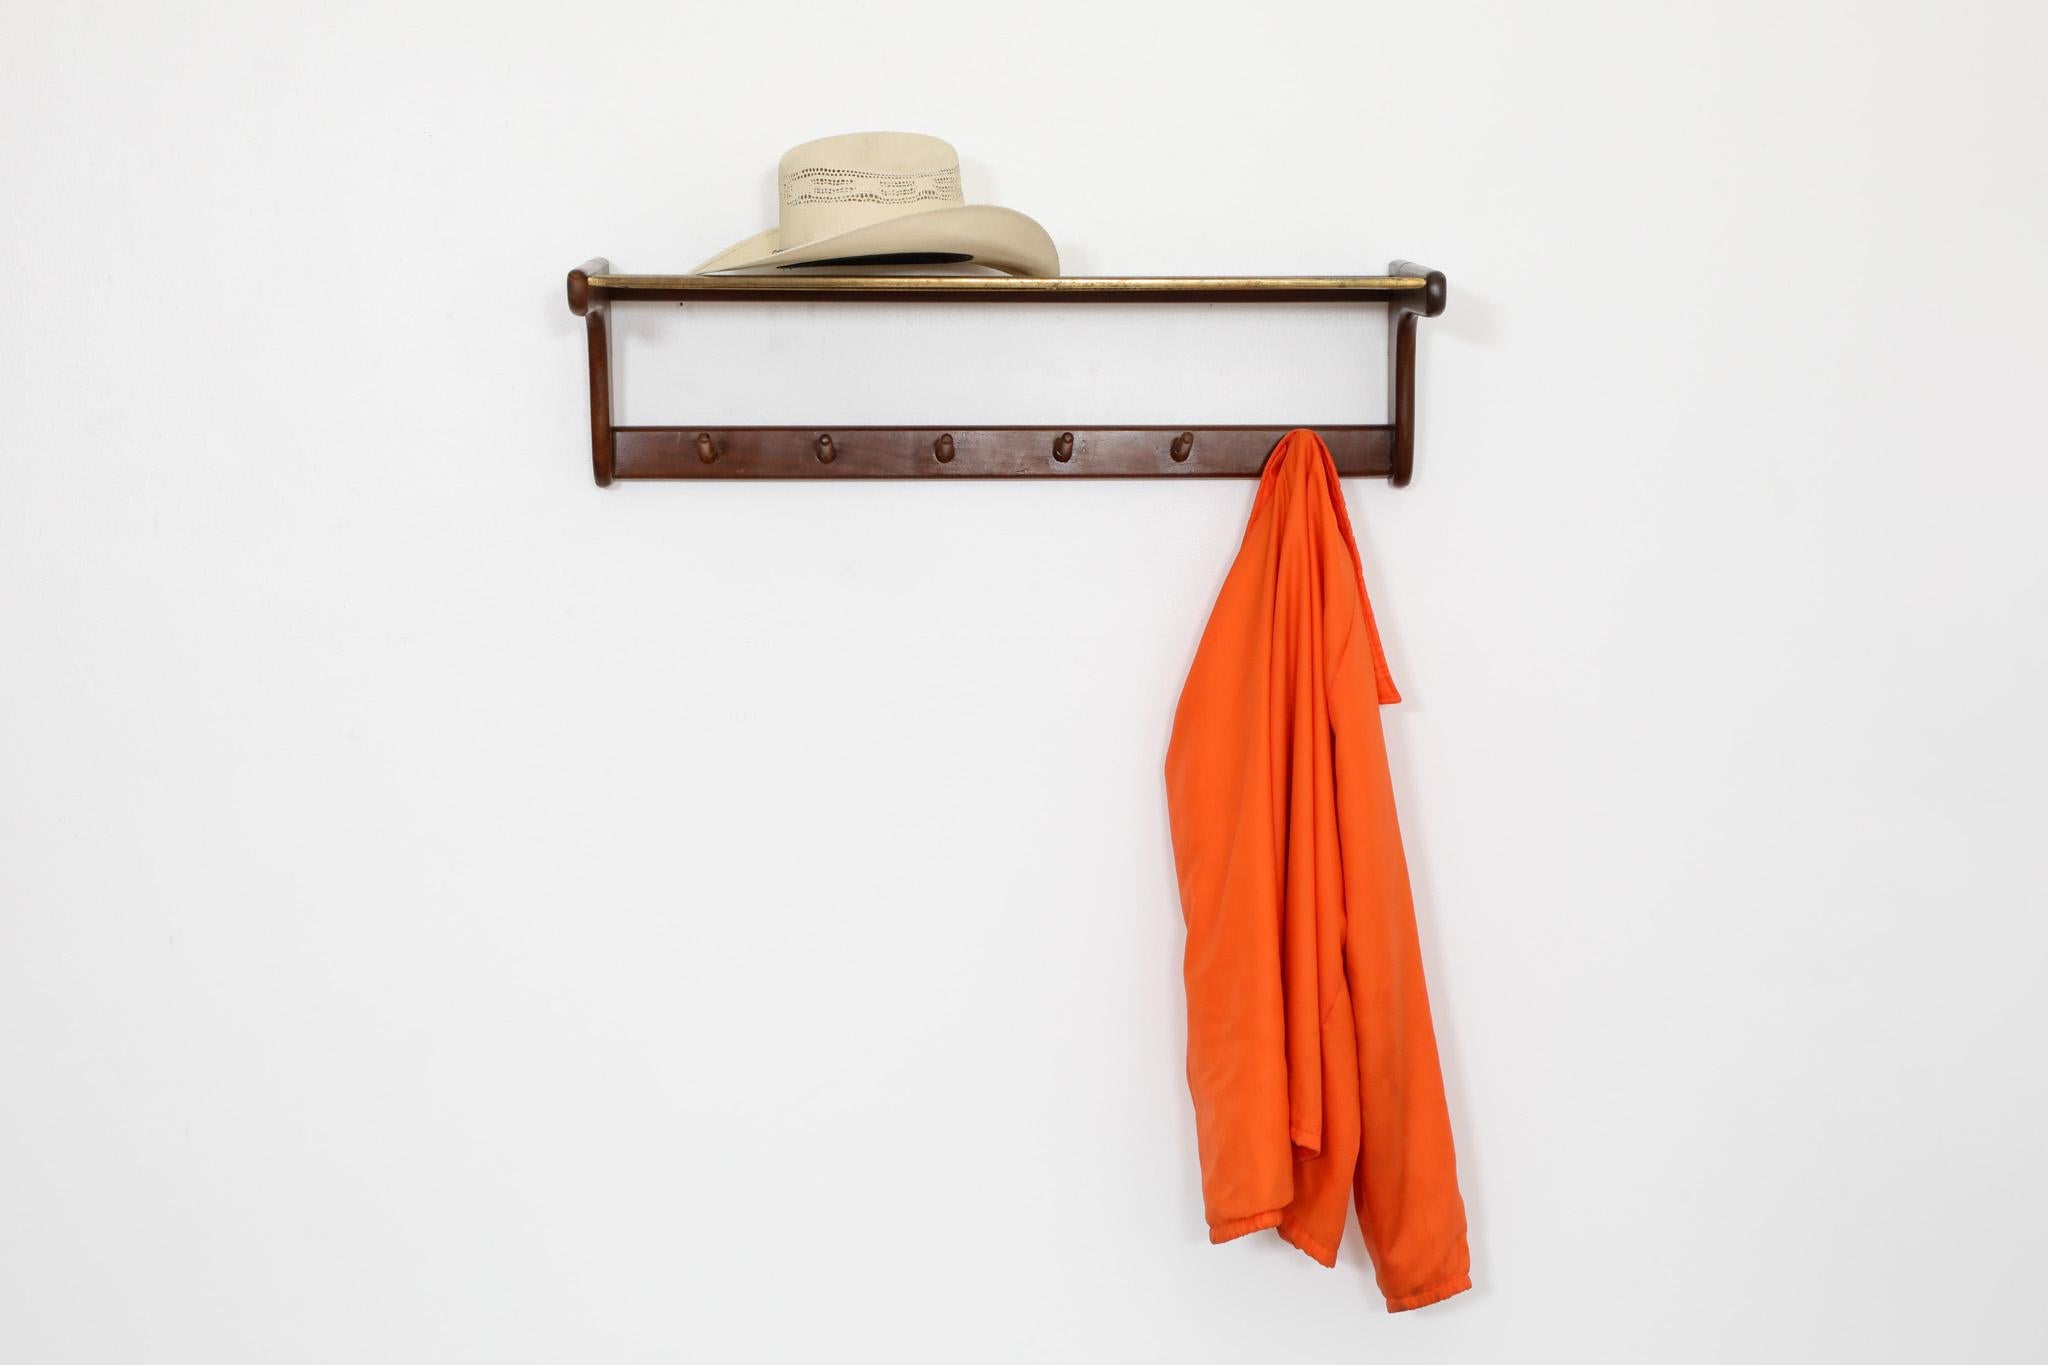 Sophisticated, Electrimeufa manufactured, Mid-Century wall mount coat rack with teak frame and hooks  and brass mesh top shelf. Attractive rustic style with soft edges and subtle patina. In original condition with wear consistent with age and use. 